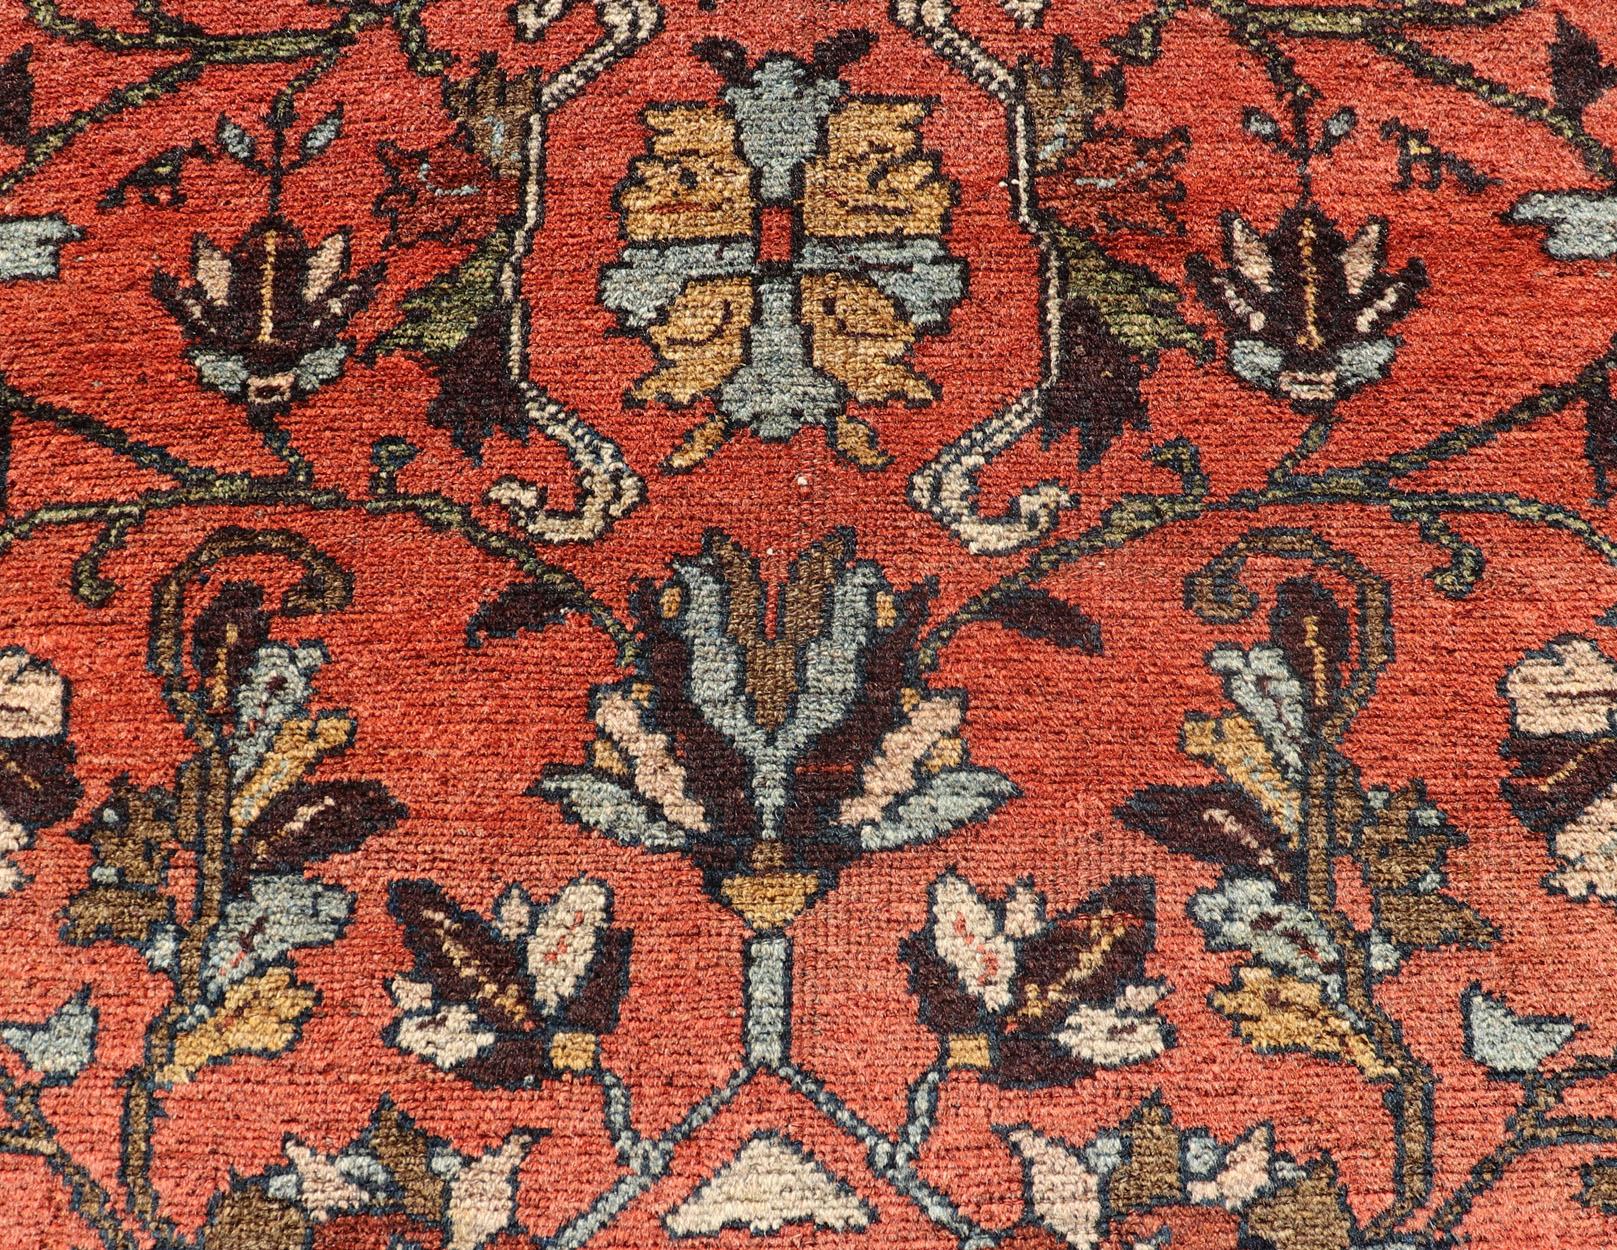 Wool Antique Persian Hamadan Carpet with Floral Designs in Soft Orange Red and Brown For Sale